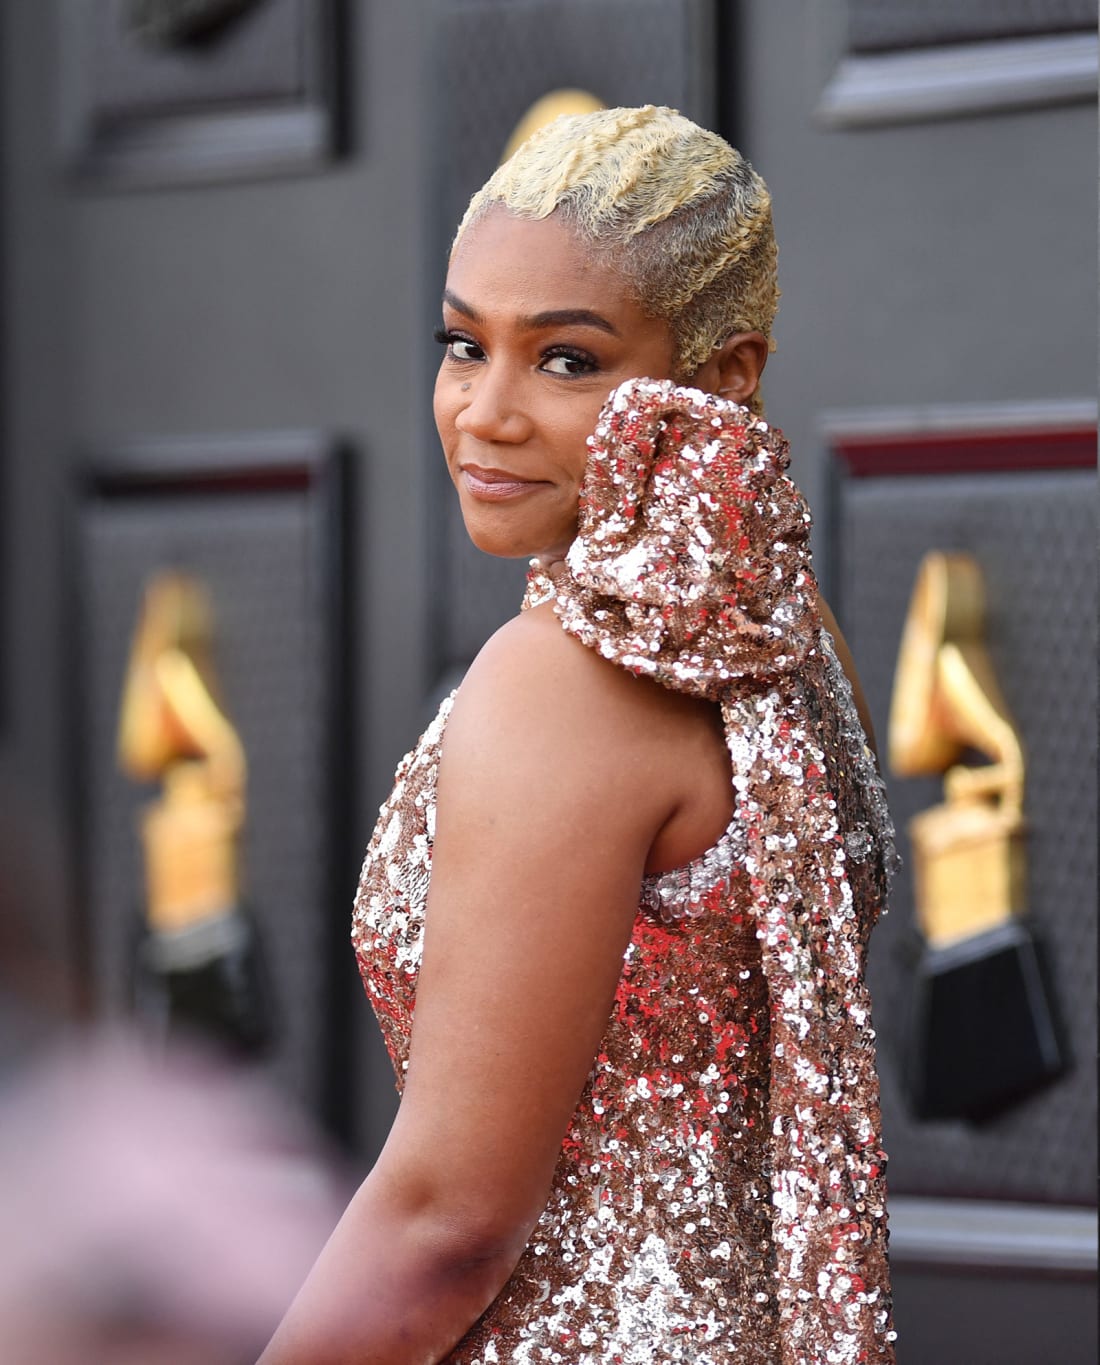 Tiffany Haddish donned a sequined gown to the event.